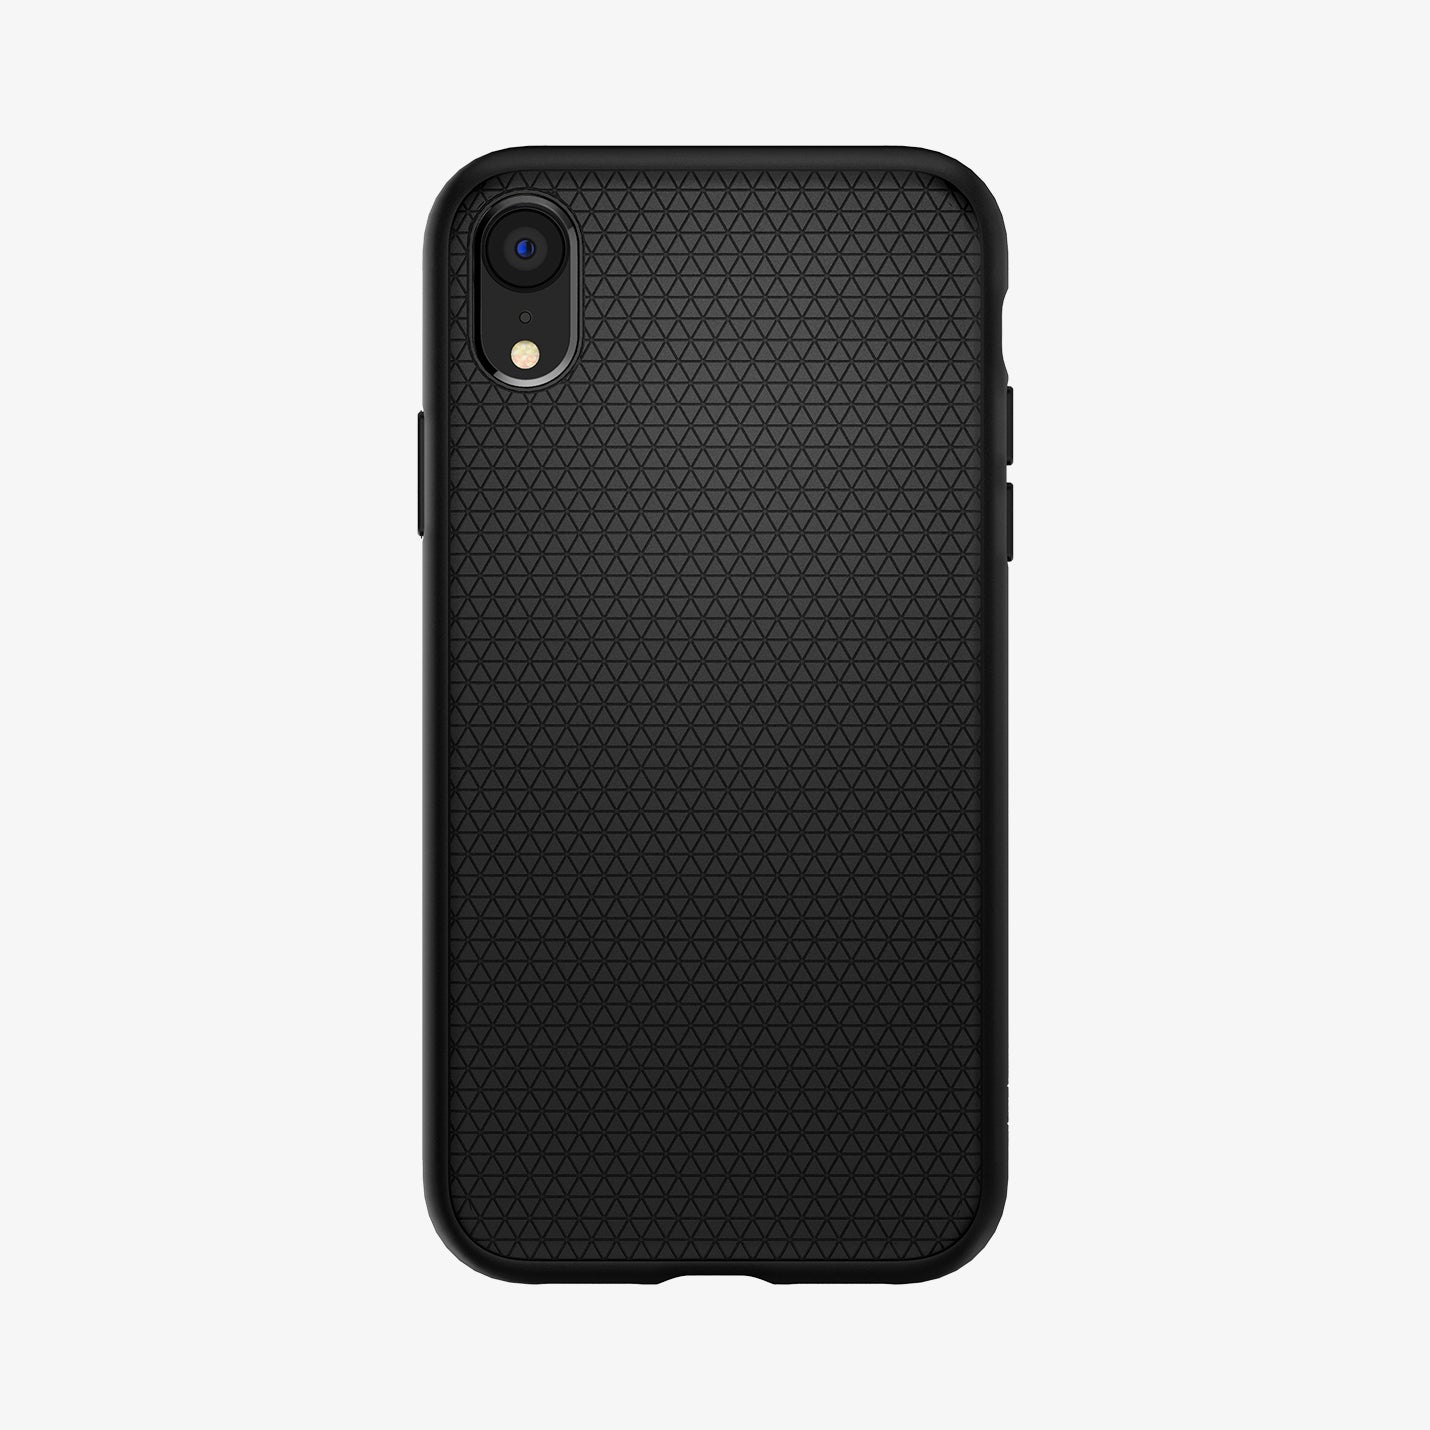 064CS24872 - iPhone XR Case Liquid Air in Black showing the back